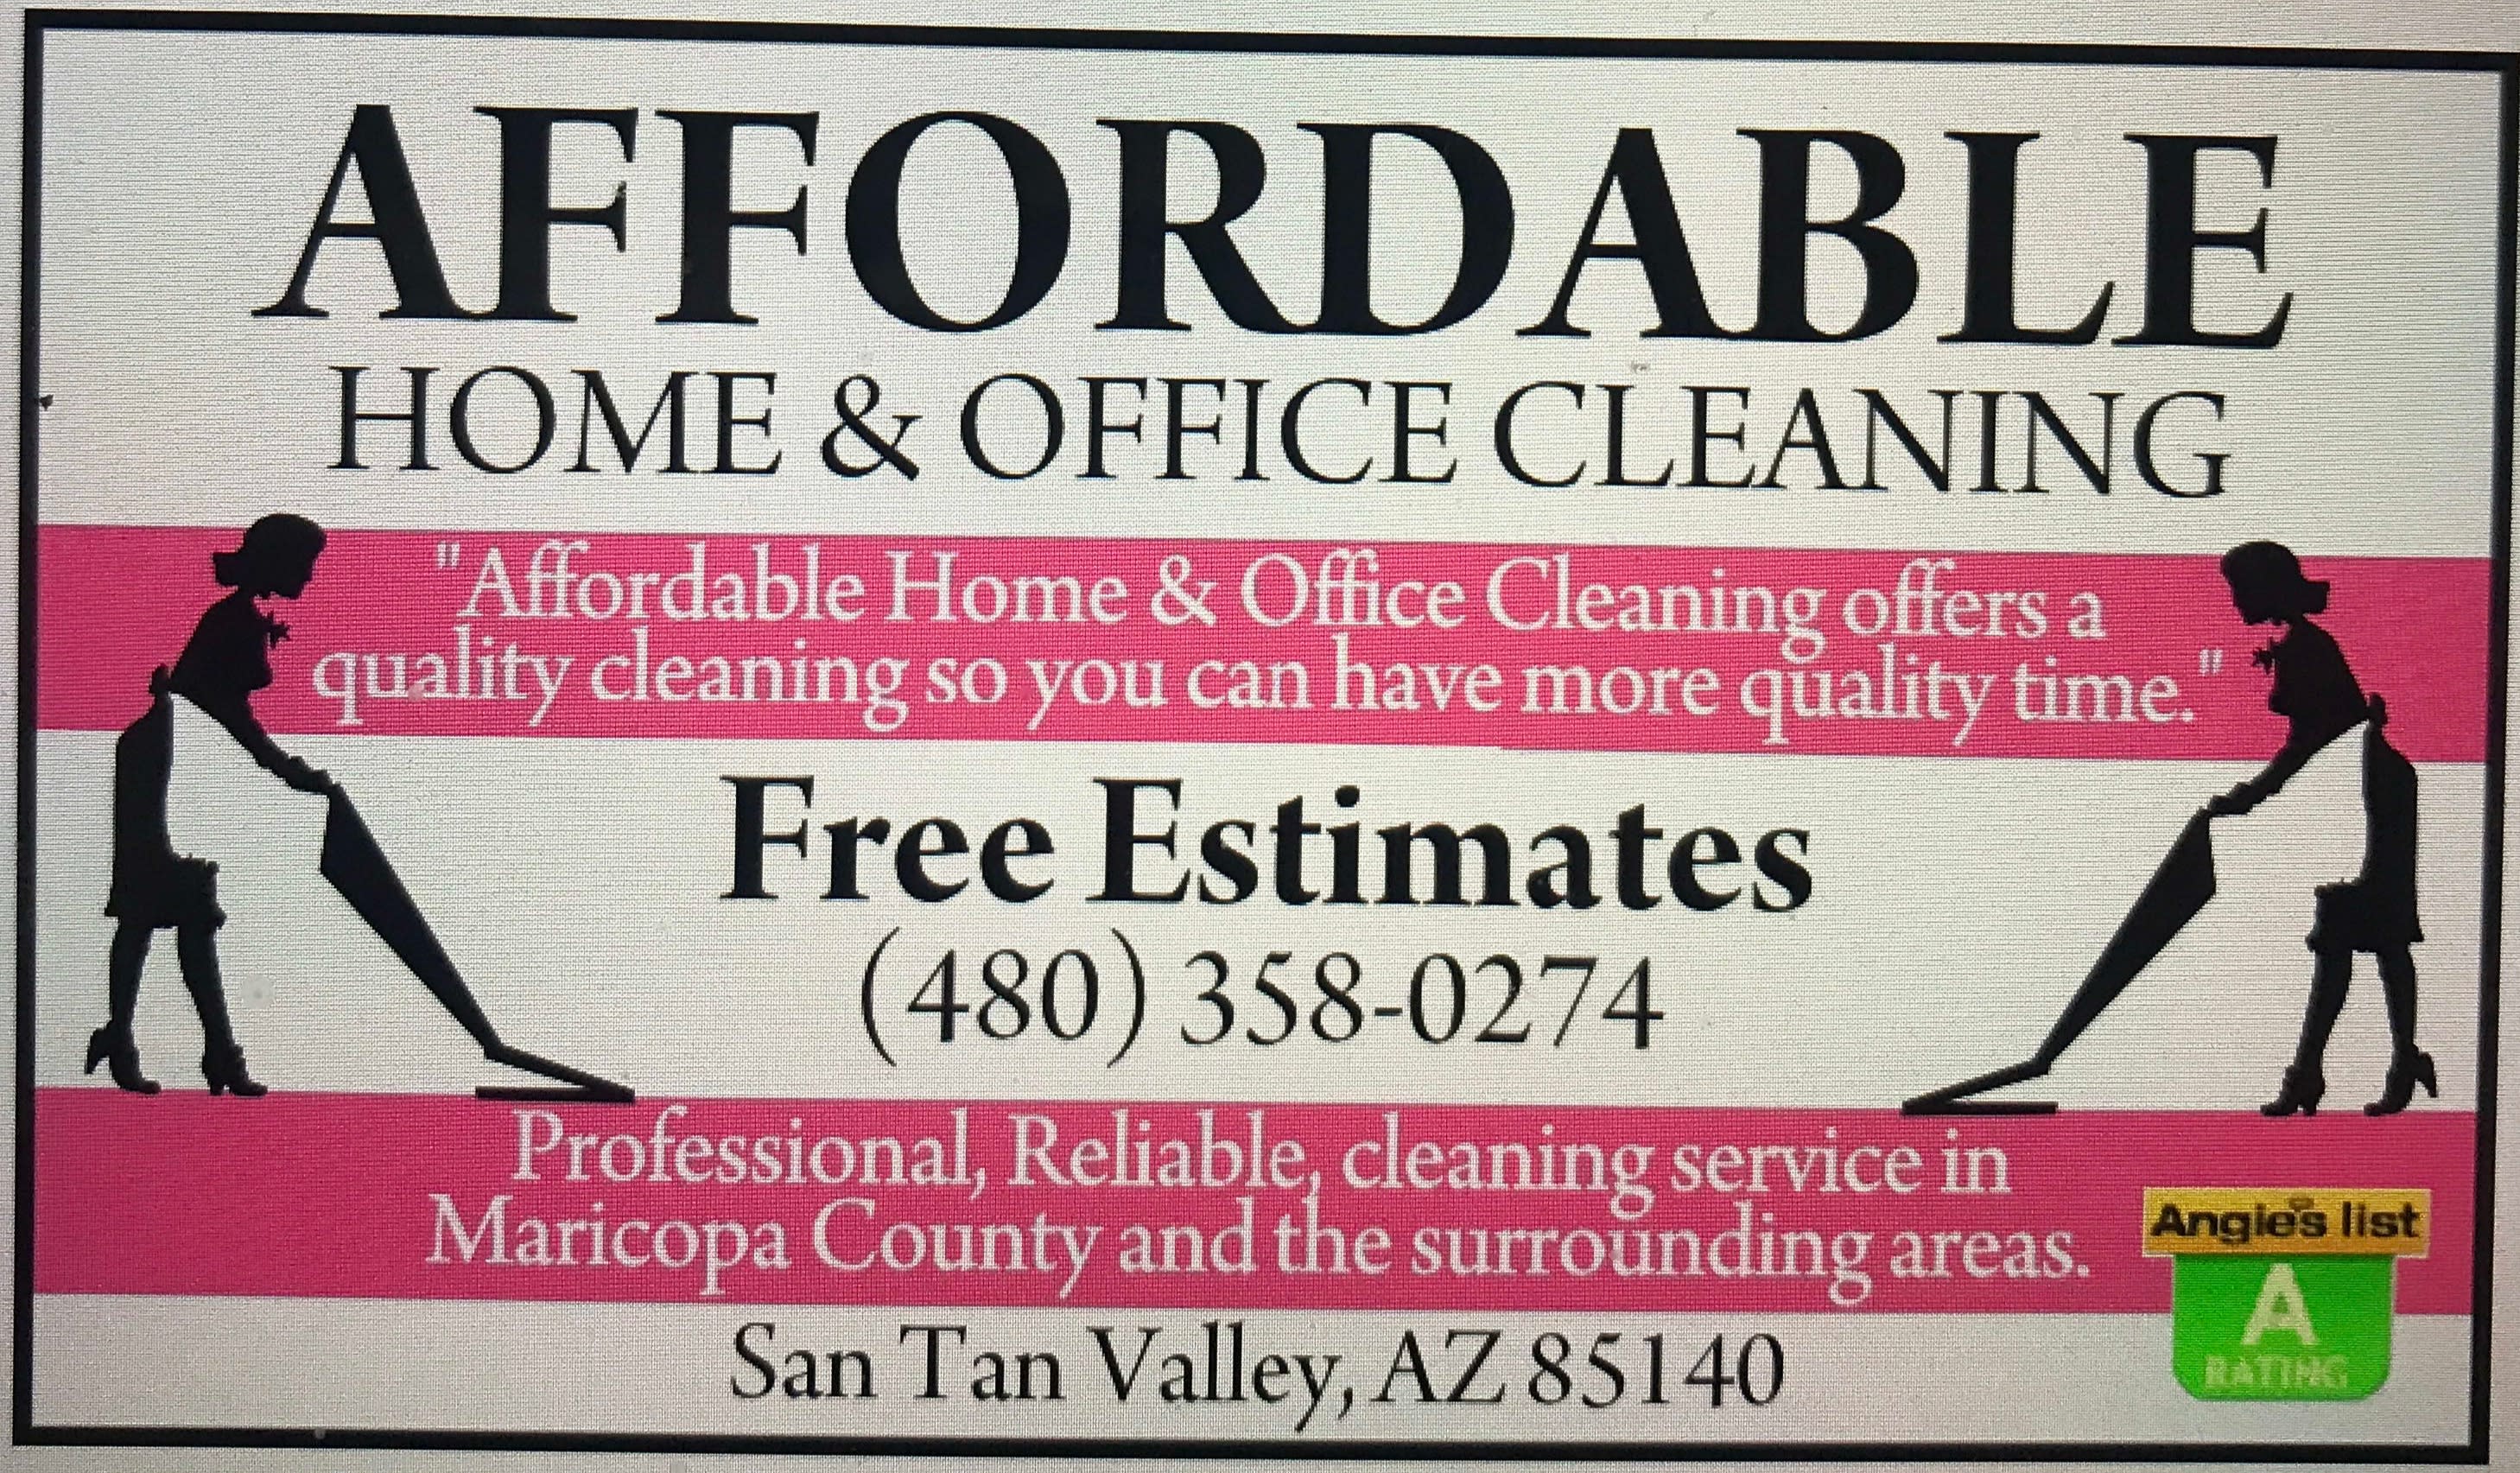 Affordable Home & Office Cleaning